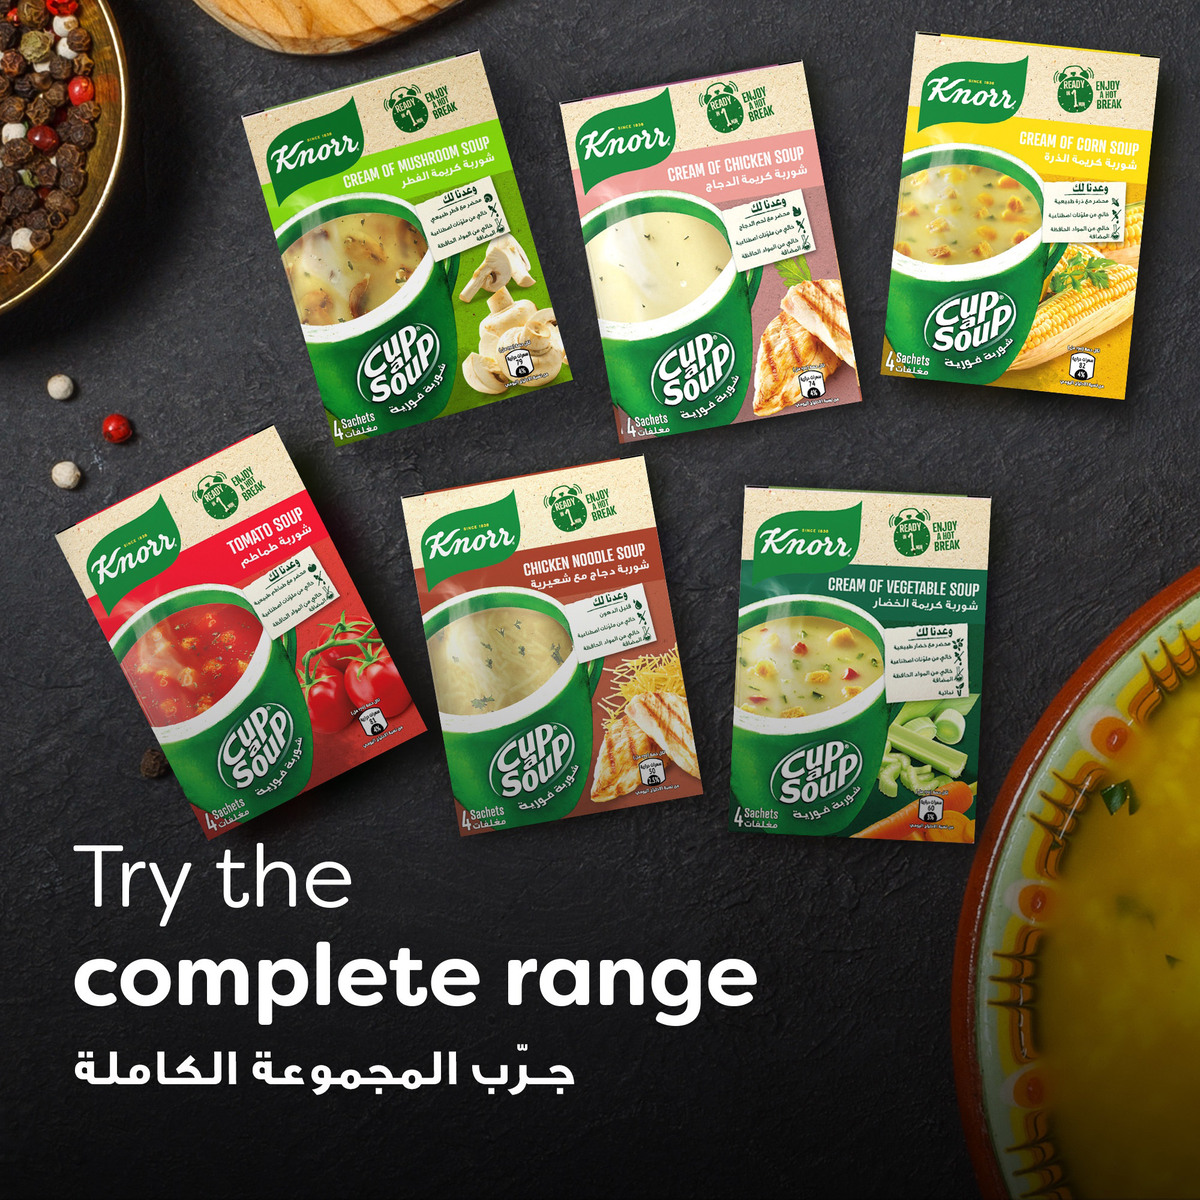 Knorr Cup-A-Soup Cream of Vegetable 4 x 18 g